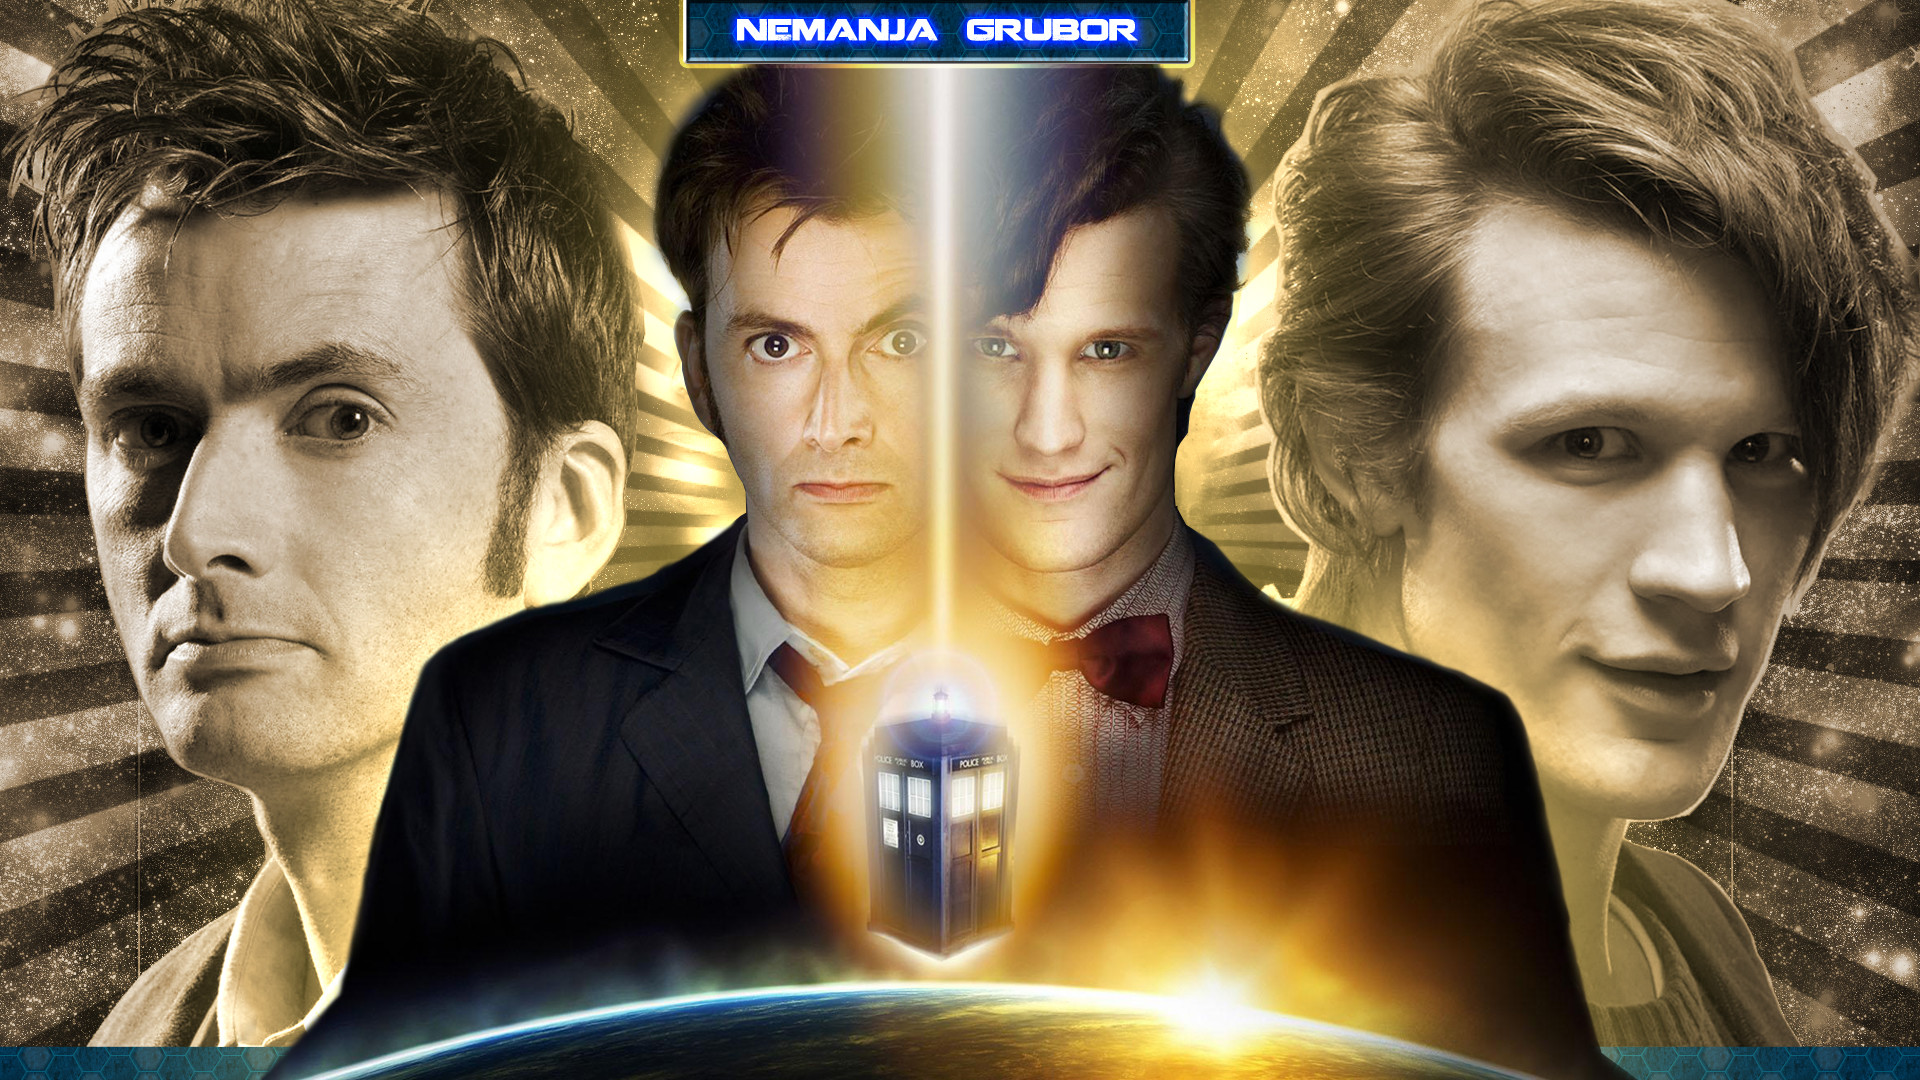 1920x1080 ... He is The Doctor wallpaper by ngrubor